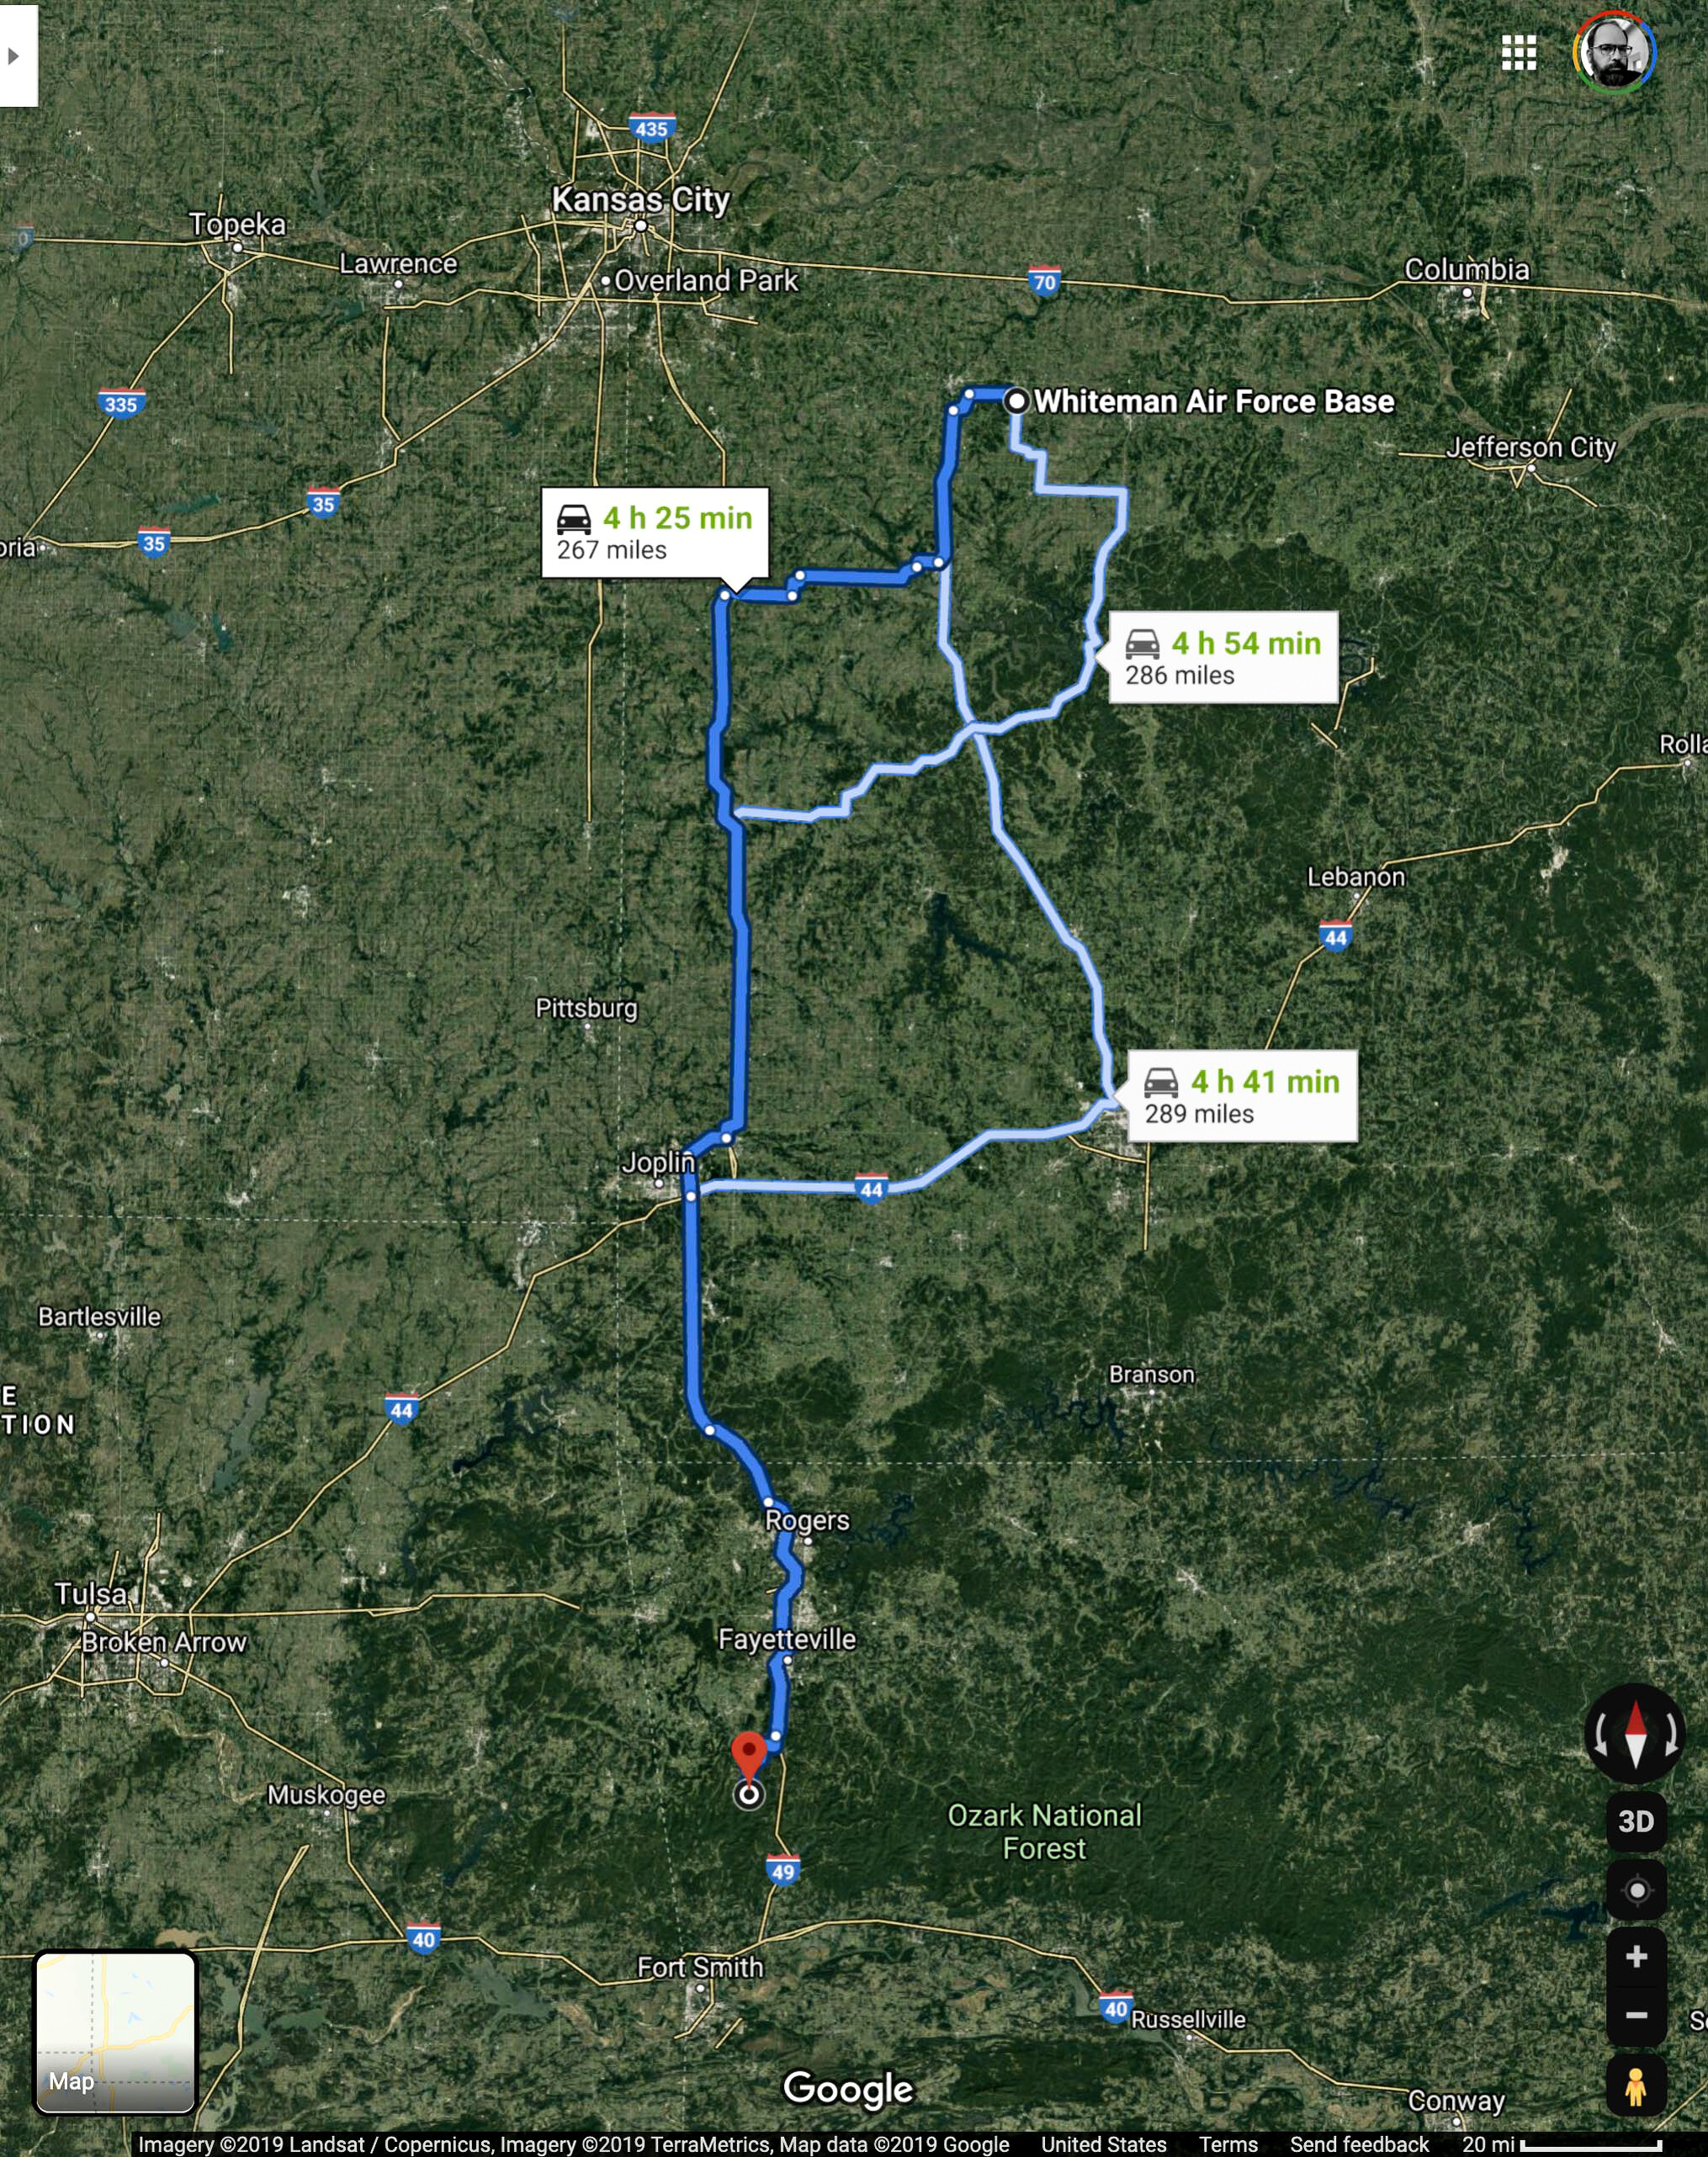  Driving distance from Whiteman AFB in Missouri to the clearing at Devil’s Den in Arkansas. 